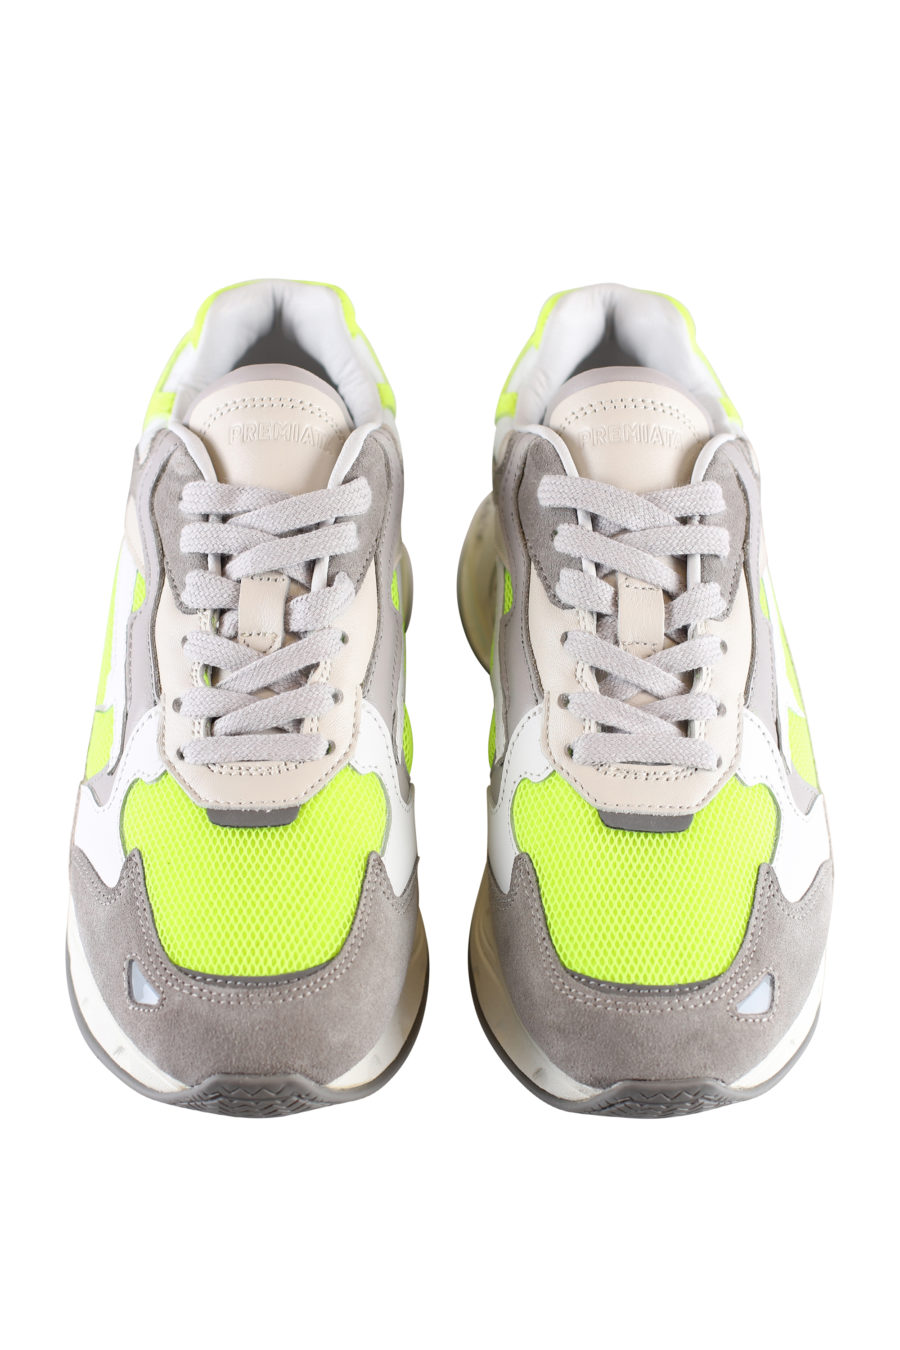 Grey and neon yellow trainers with platform "Sharkyd" - IMG 1843